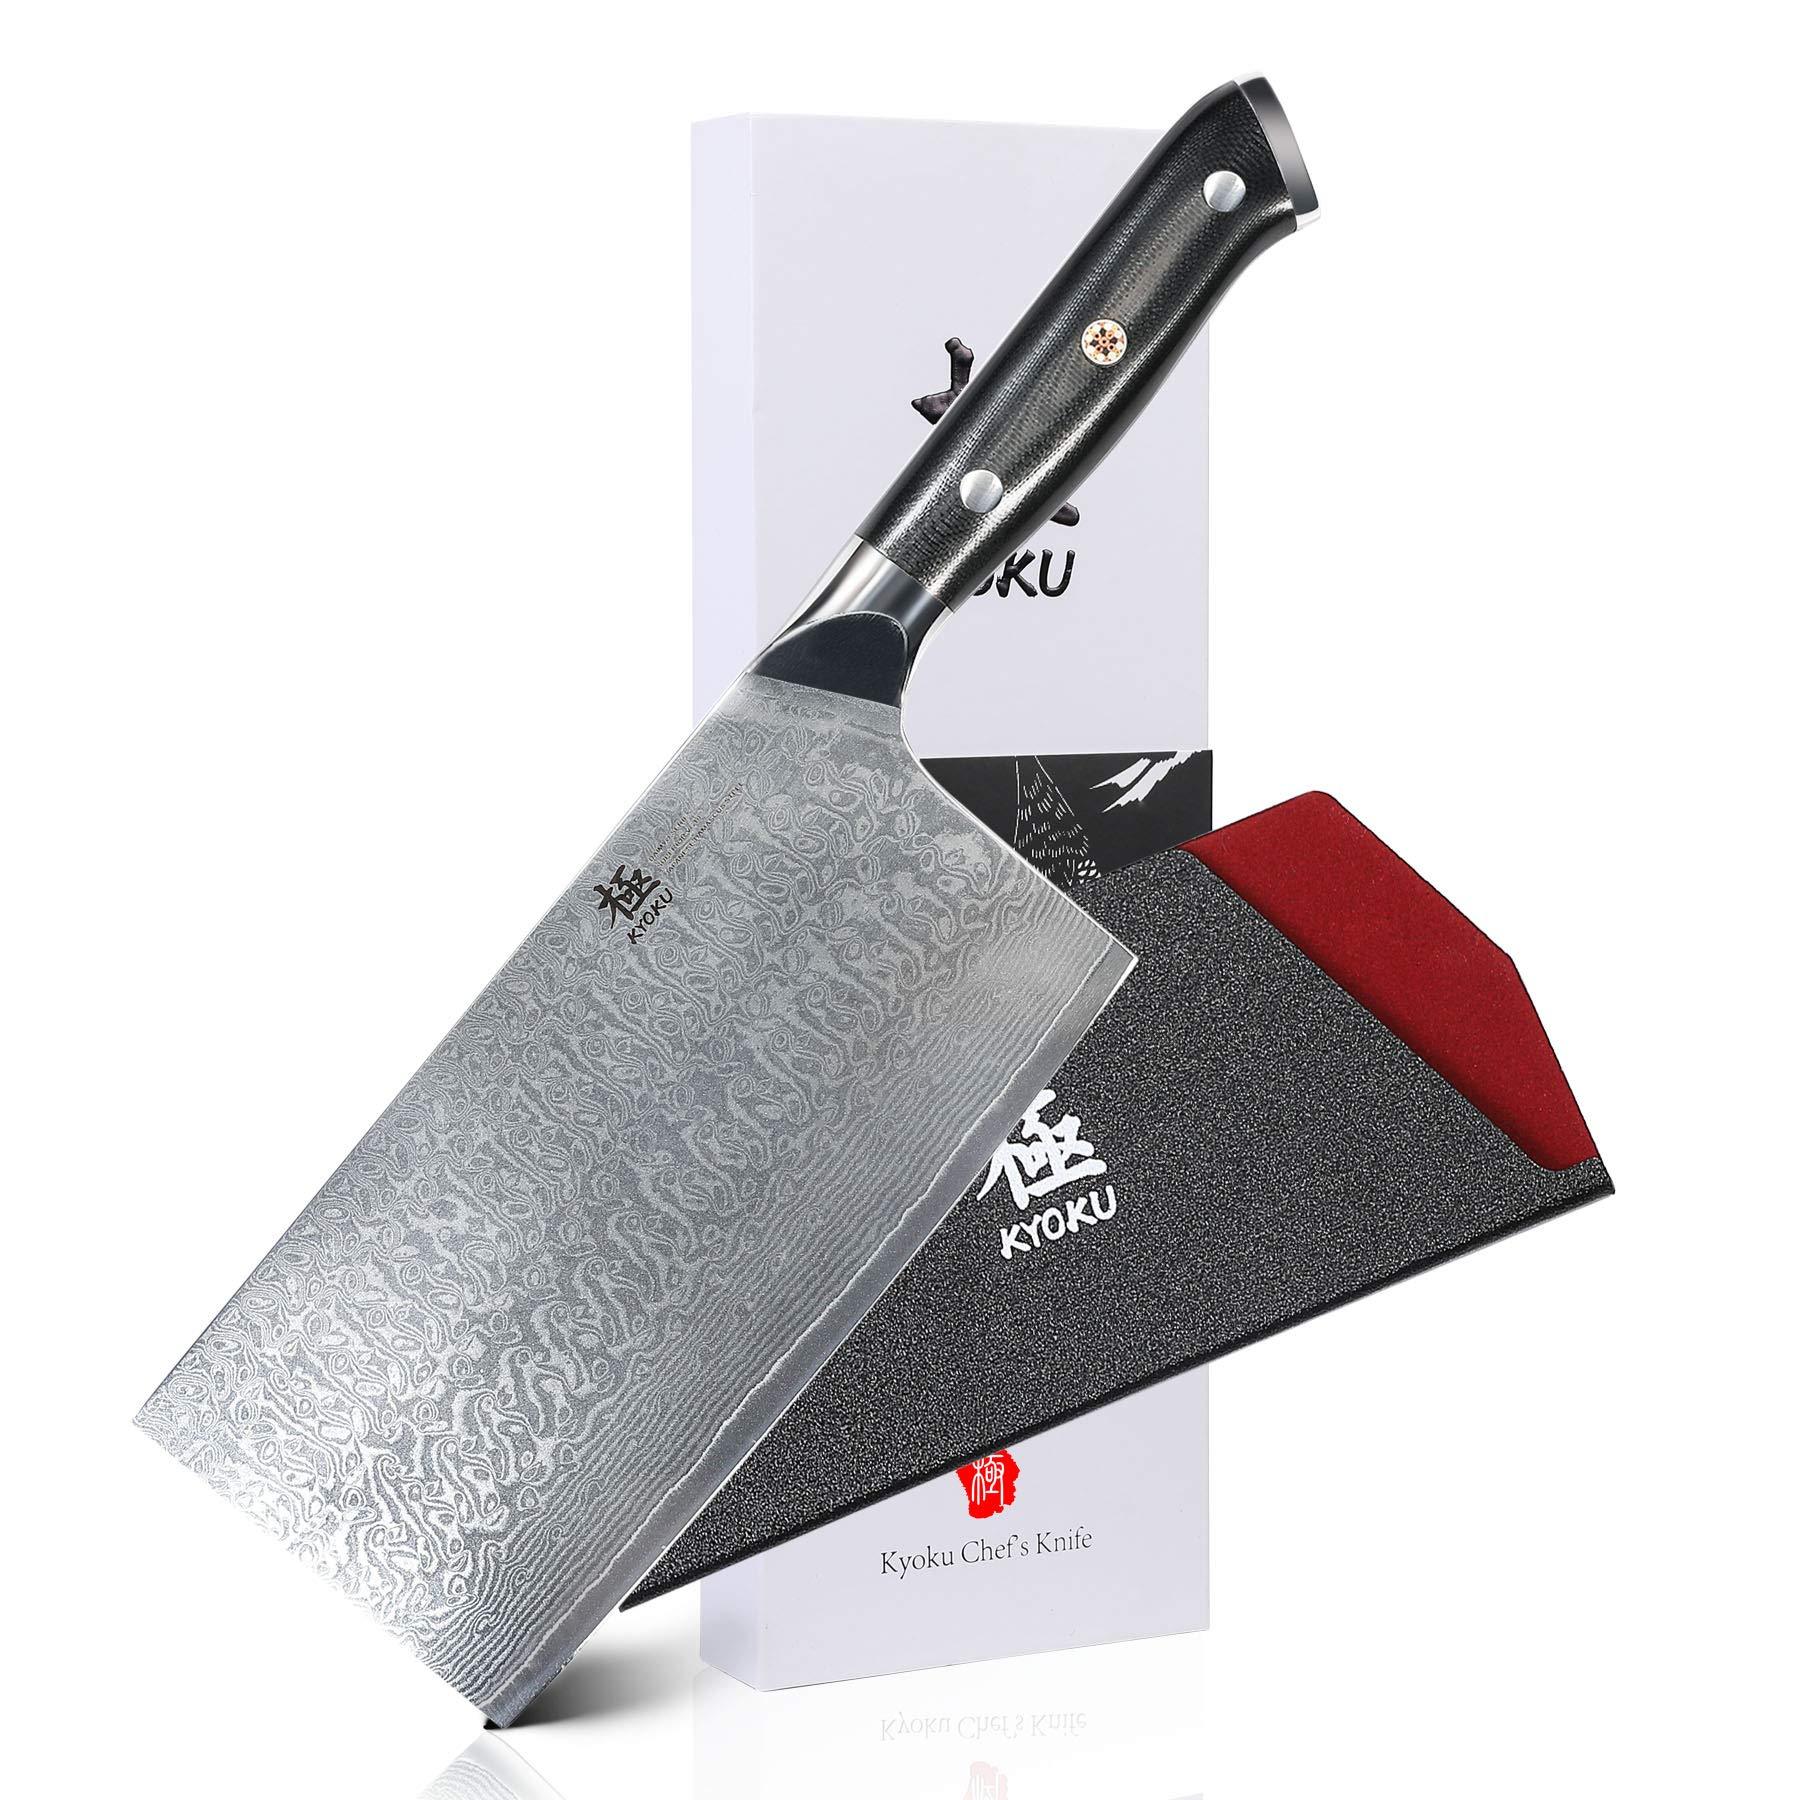 7 Ruthlessly Sharp Knives For Butchers